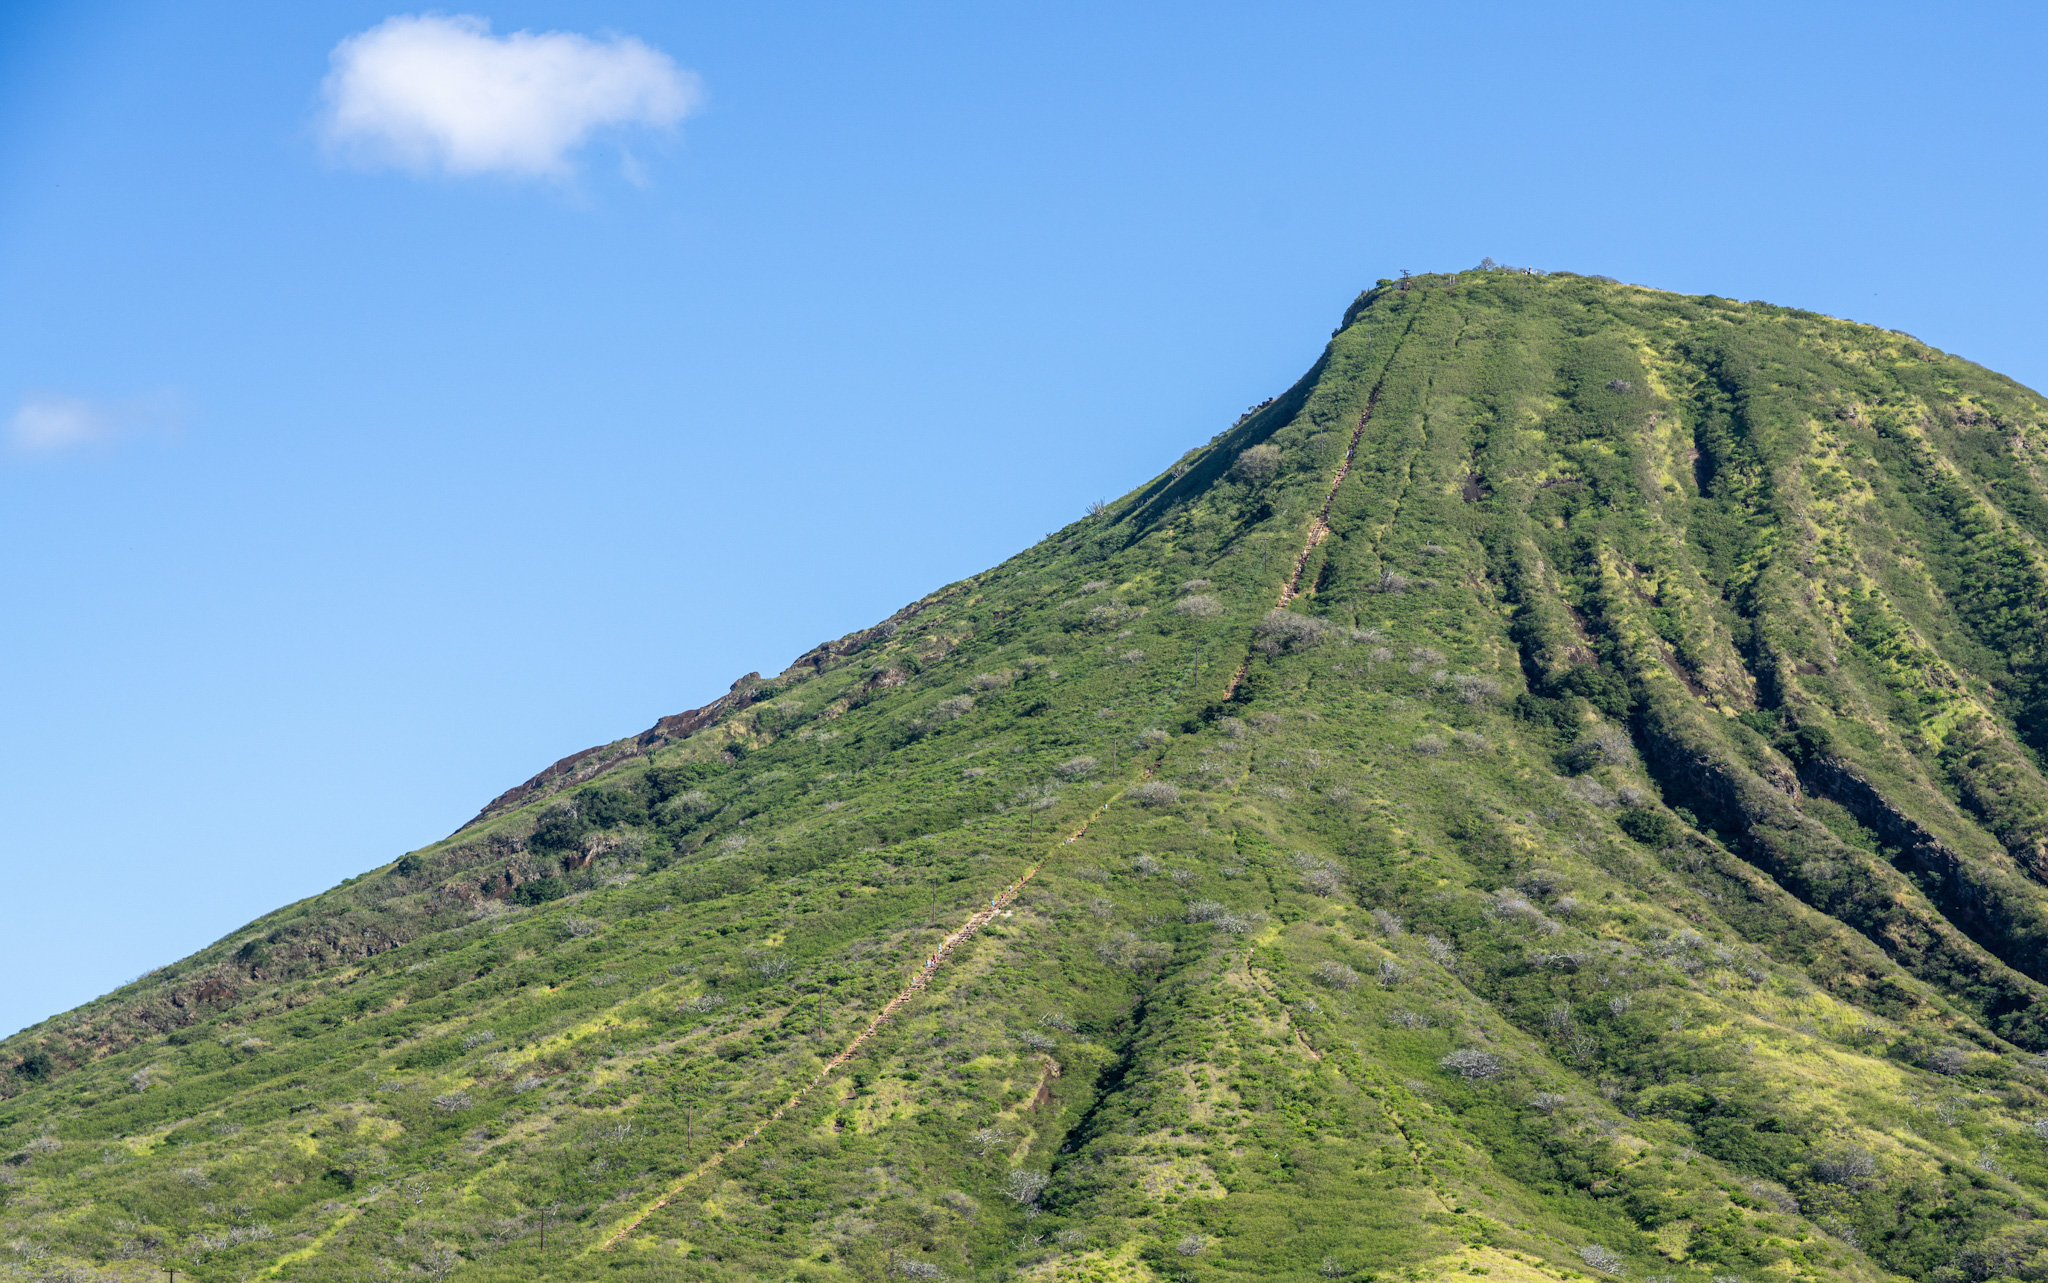 Aerial view of Koko Head Crater and stairs leading to summit